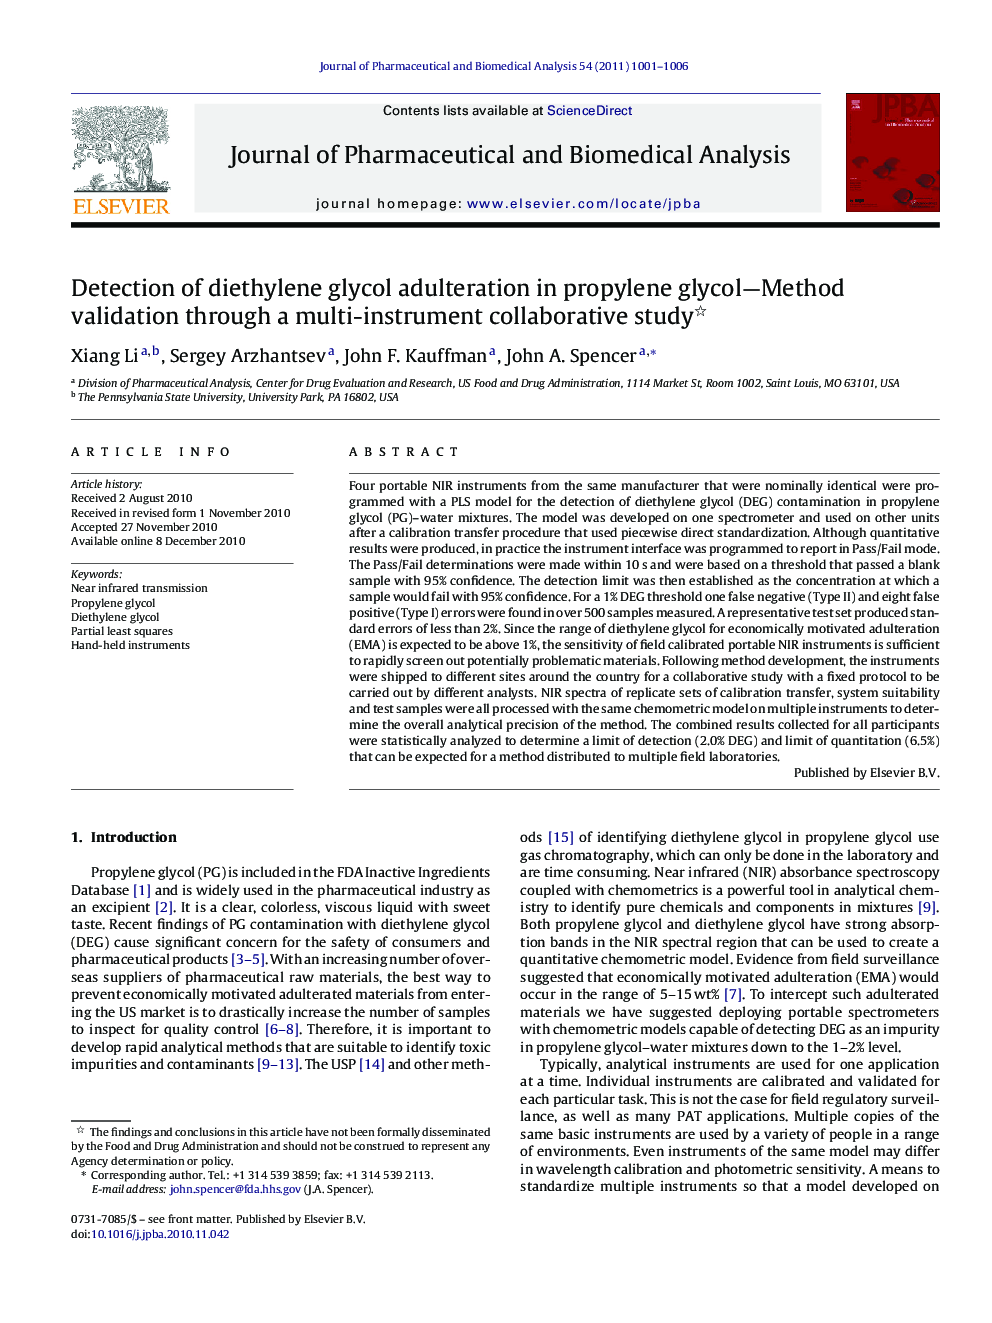 Detection of diethylene glycol adulteration in propylene glycol-Method validation through a multi-instrument collaborative study